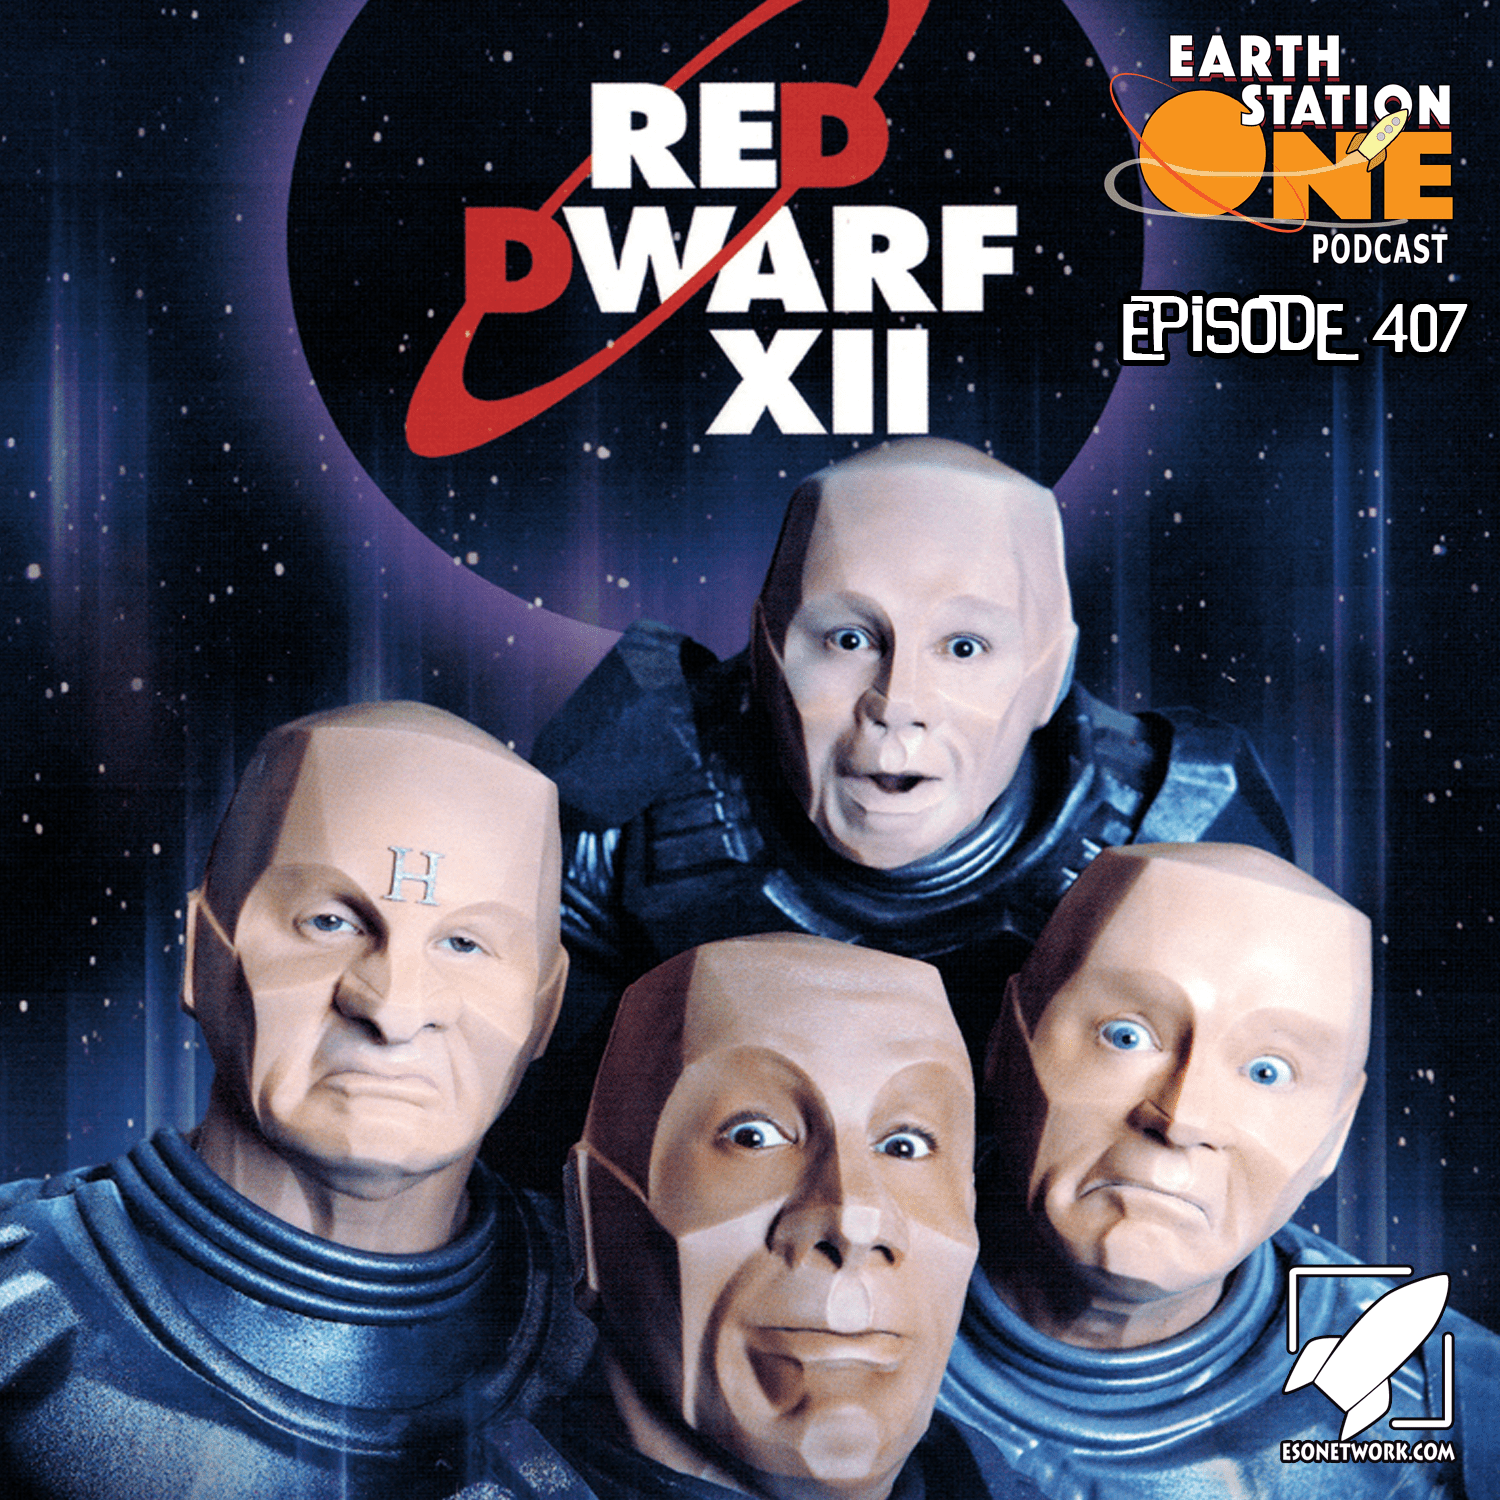 Earth Station One Podcst Ep 407 - Red Dwarf Series XII